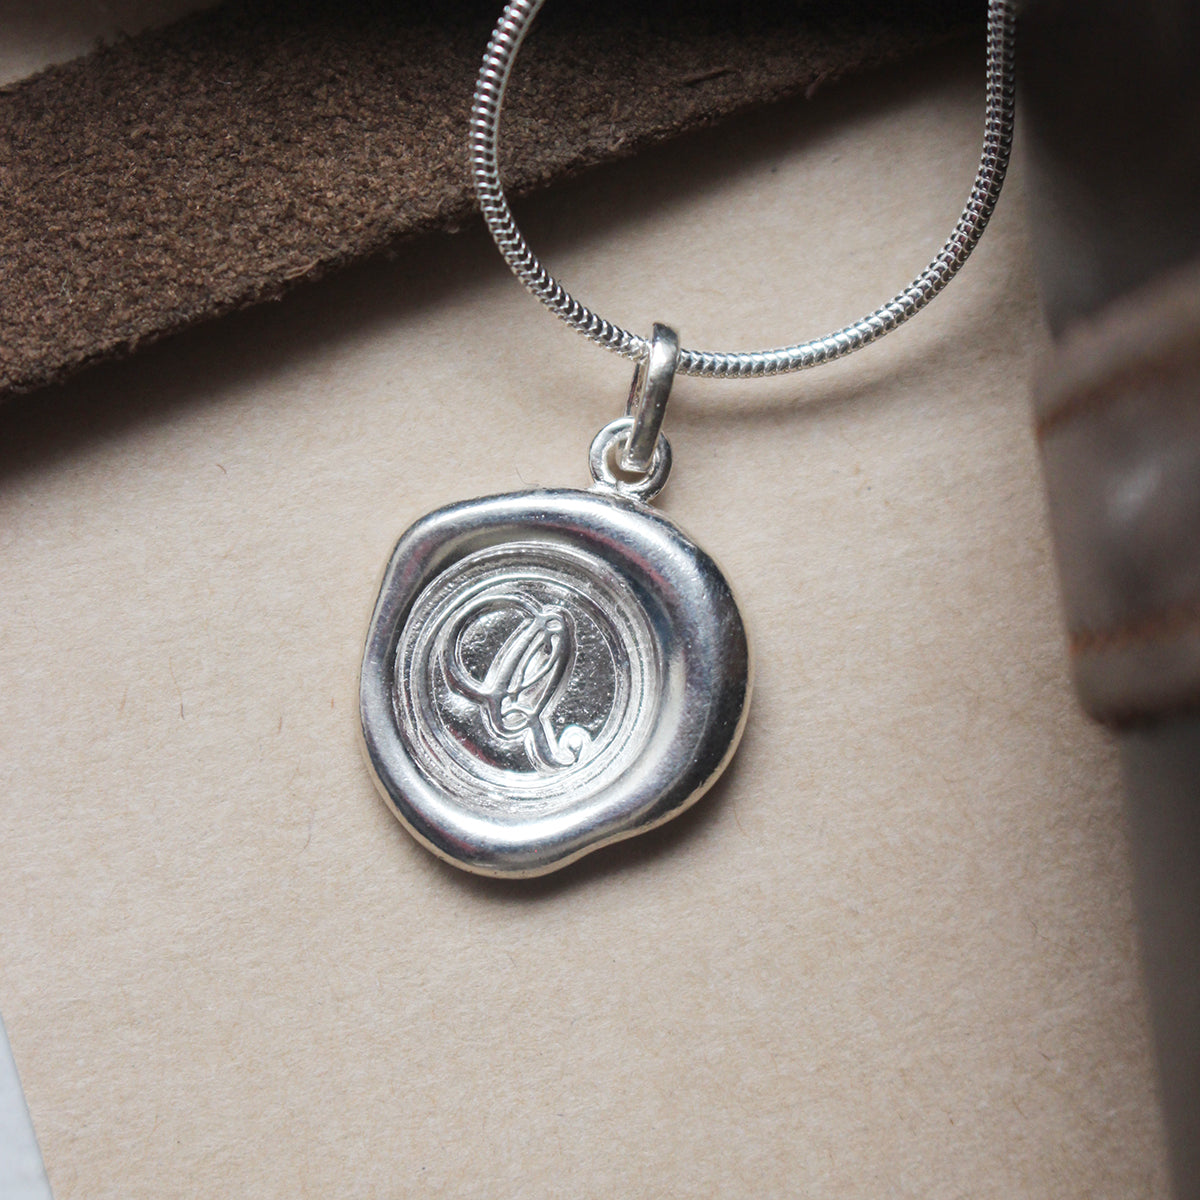 Sterling Silver Wax Seal Necklace - Initial Monogram Q